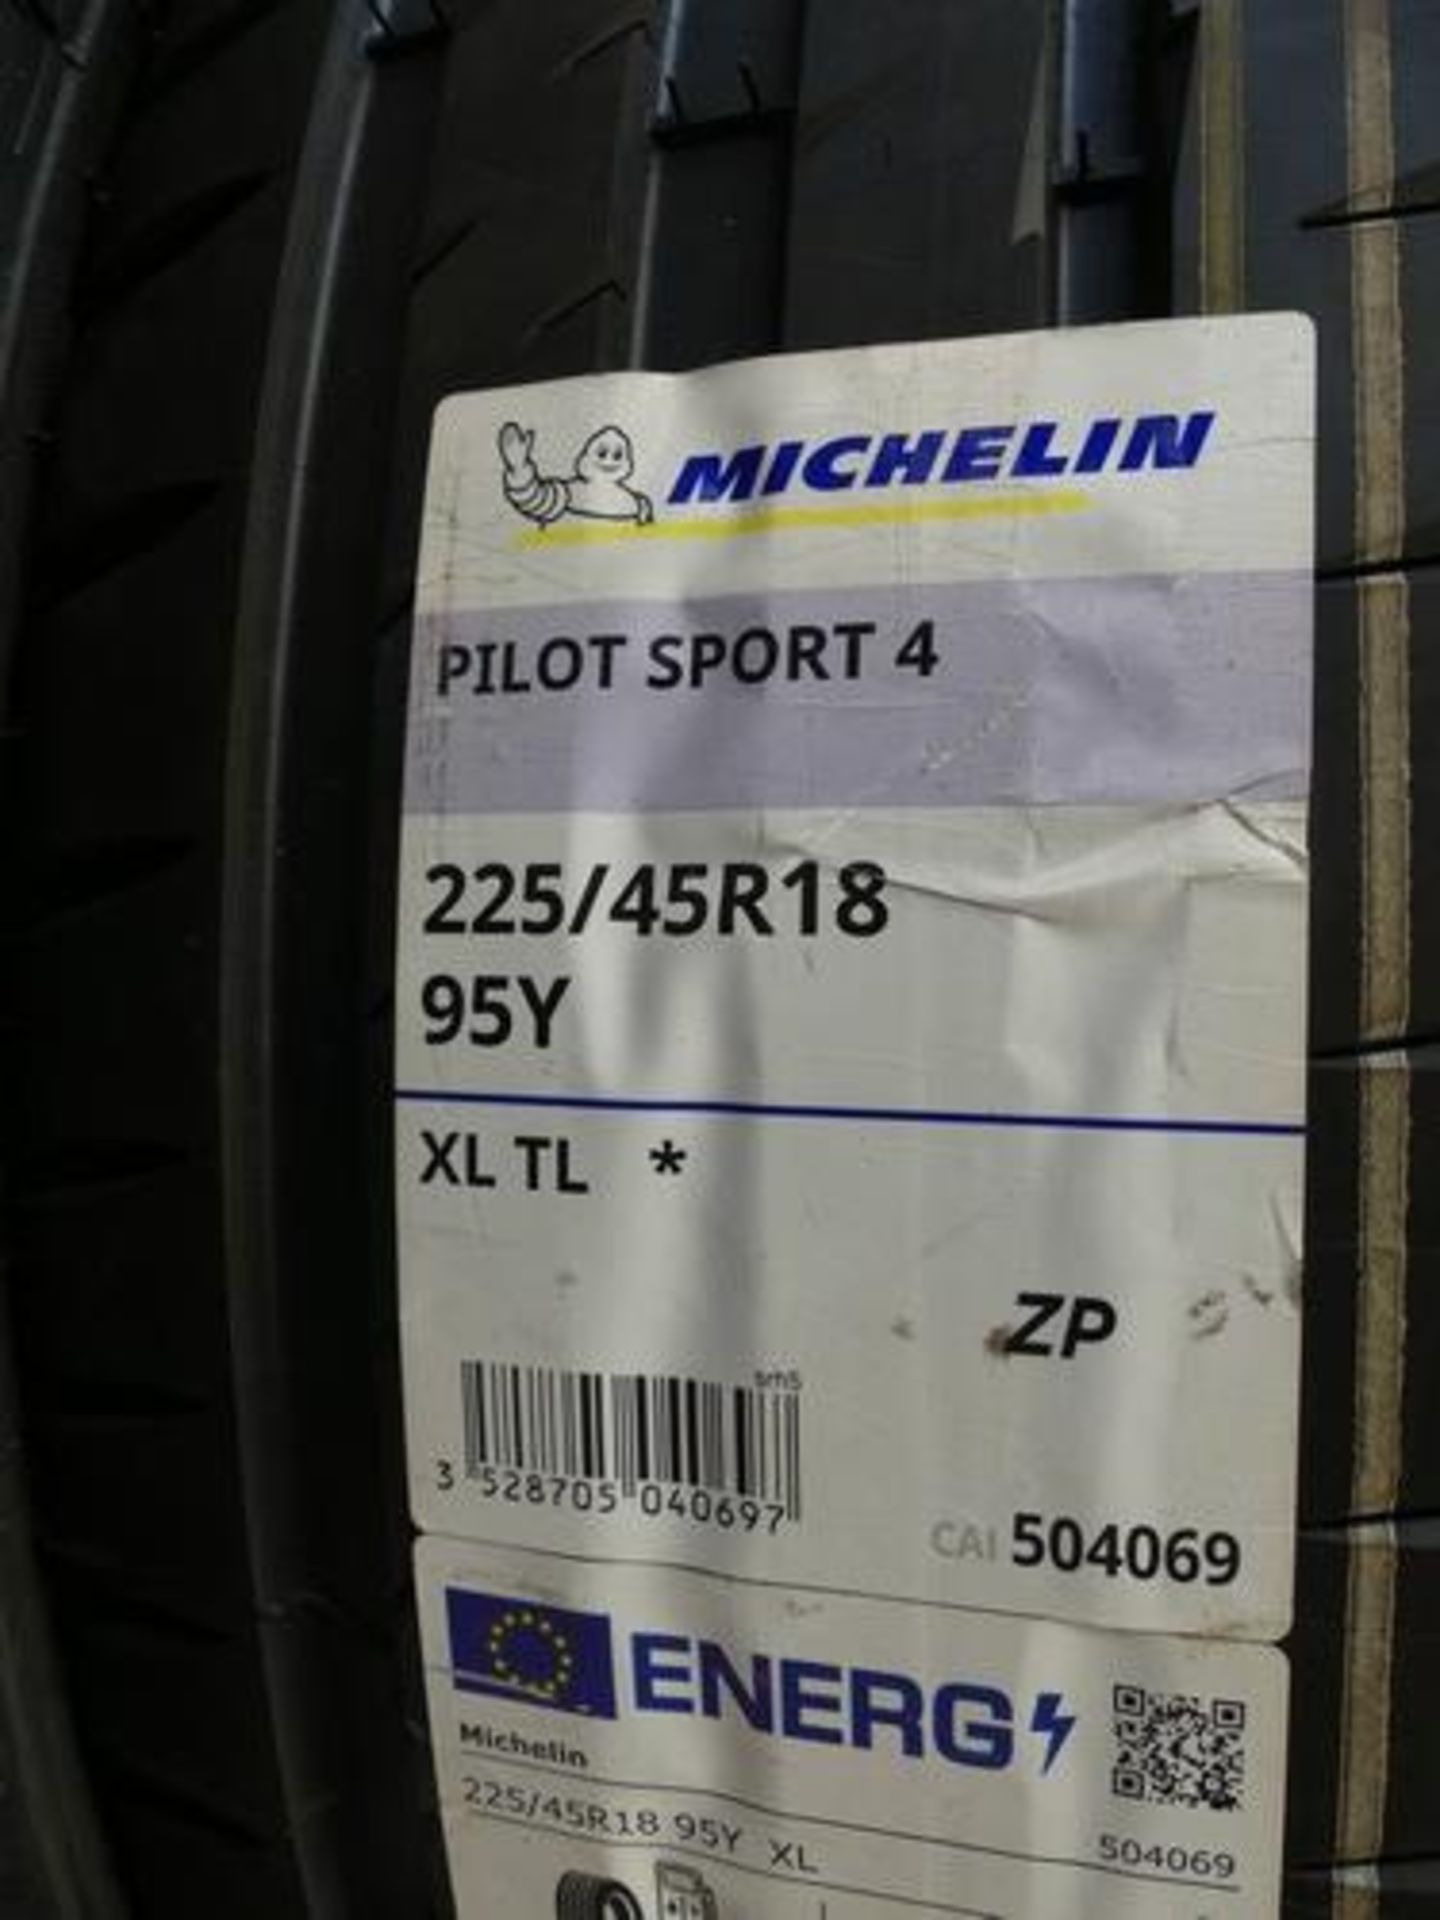 1 x Michelin Pilot Sport 4 tyre, size 225/45R18 95Y - New with label (pallet 20